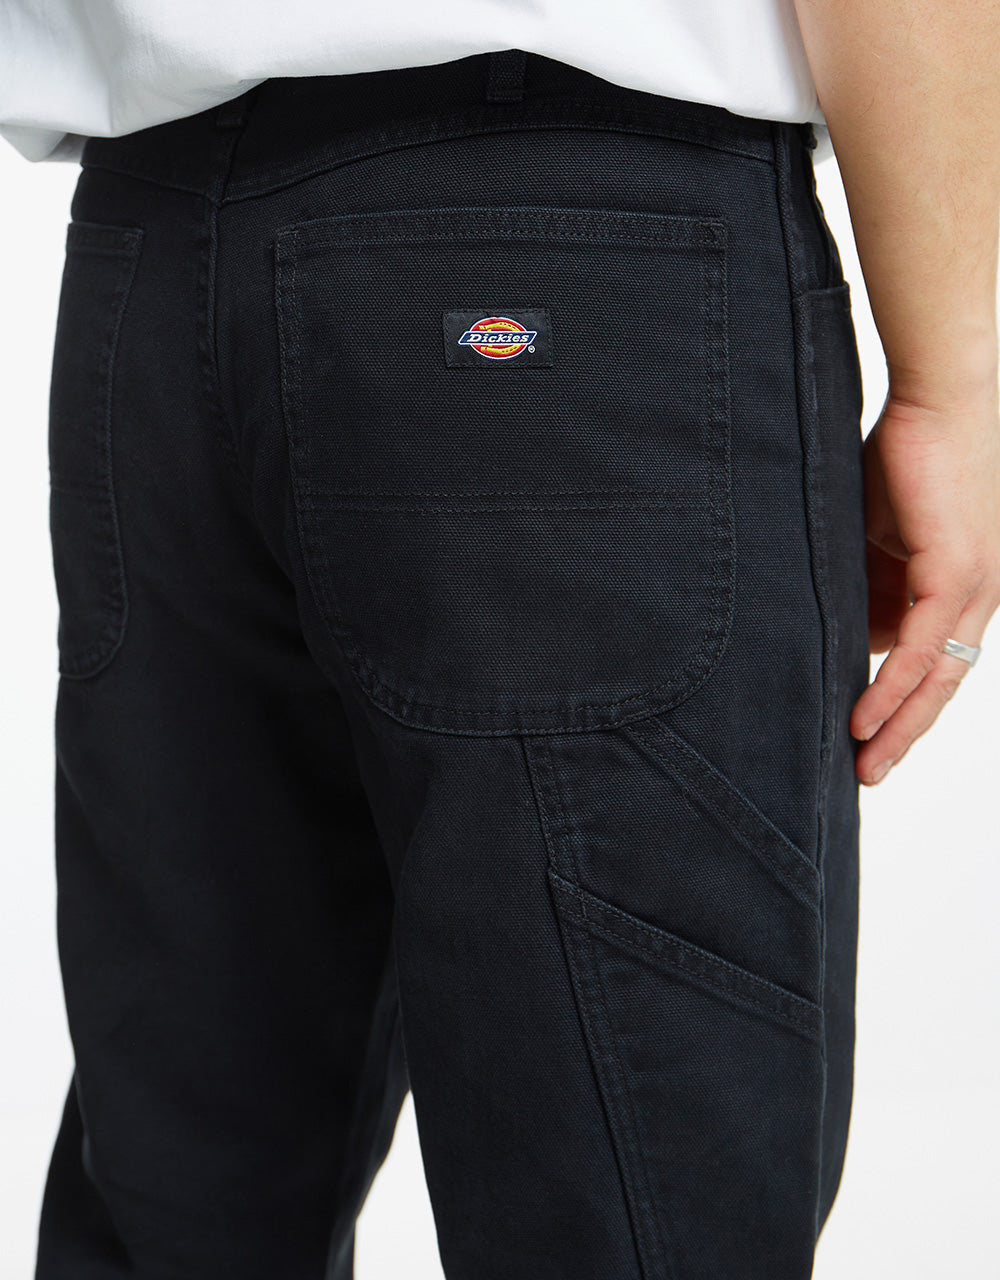 Dickies Duck Canvas Carpenter Pant - Stone Washed Black